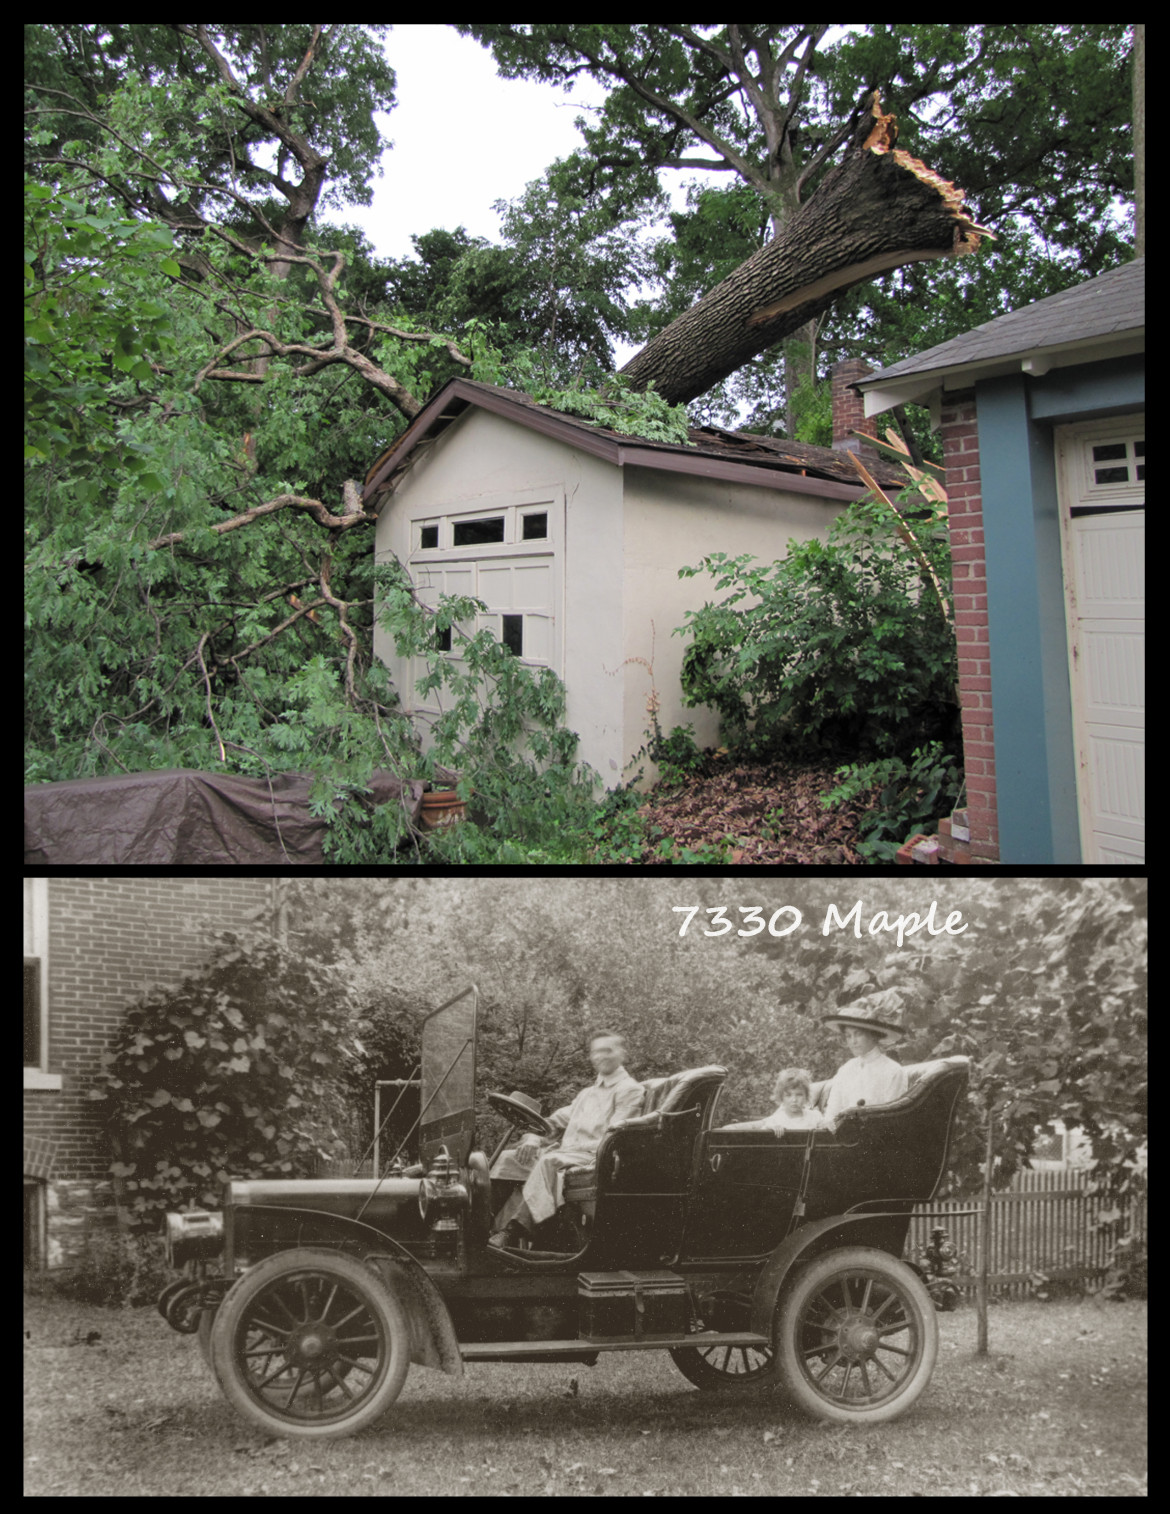 Lost to a severe storm in May 2011, this obviously sturdy garage was a feature on our historic walking tour of Maplewood.  Note the chimney which was needed to warm the family's balky-in-cold-weather auto seen below, a Winton Flyer. 